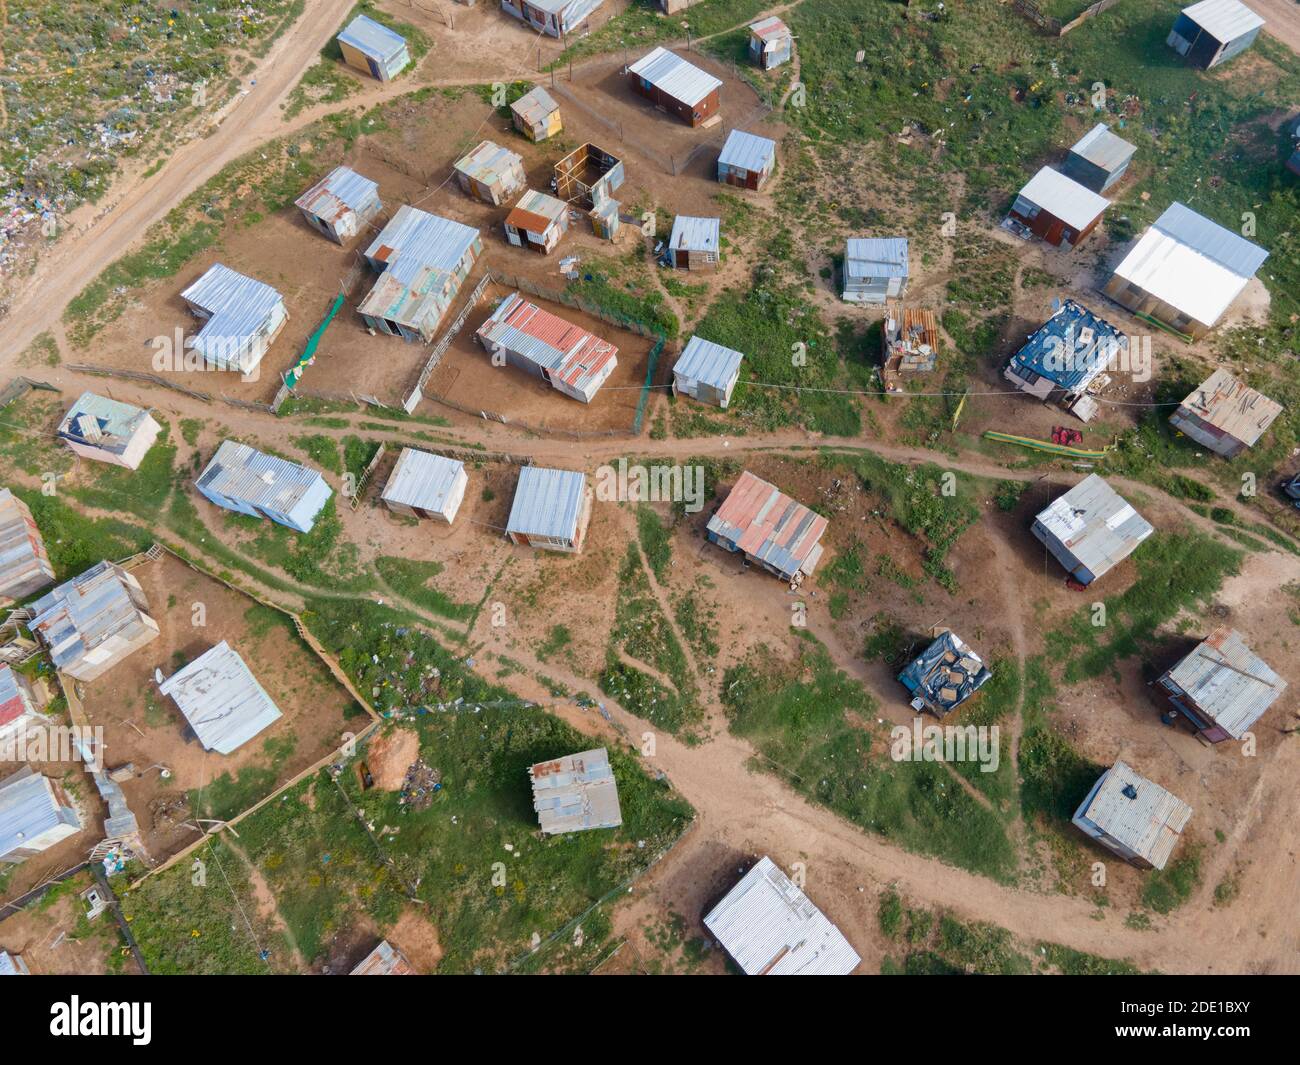 Shanty town as seen from drone point of view Stock Photo